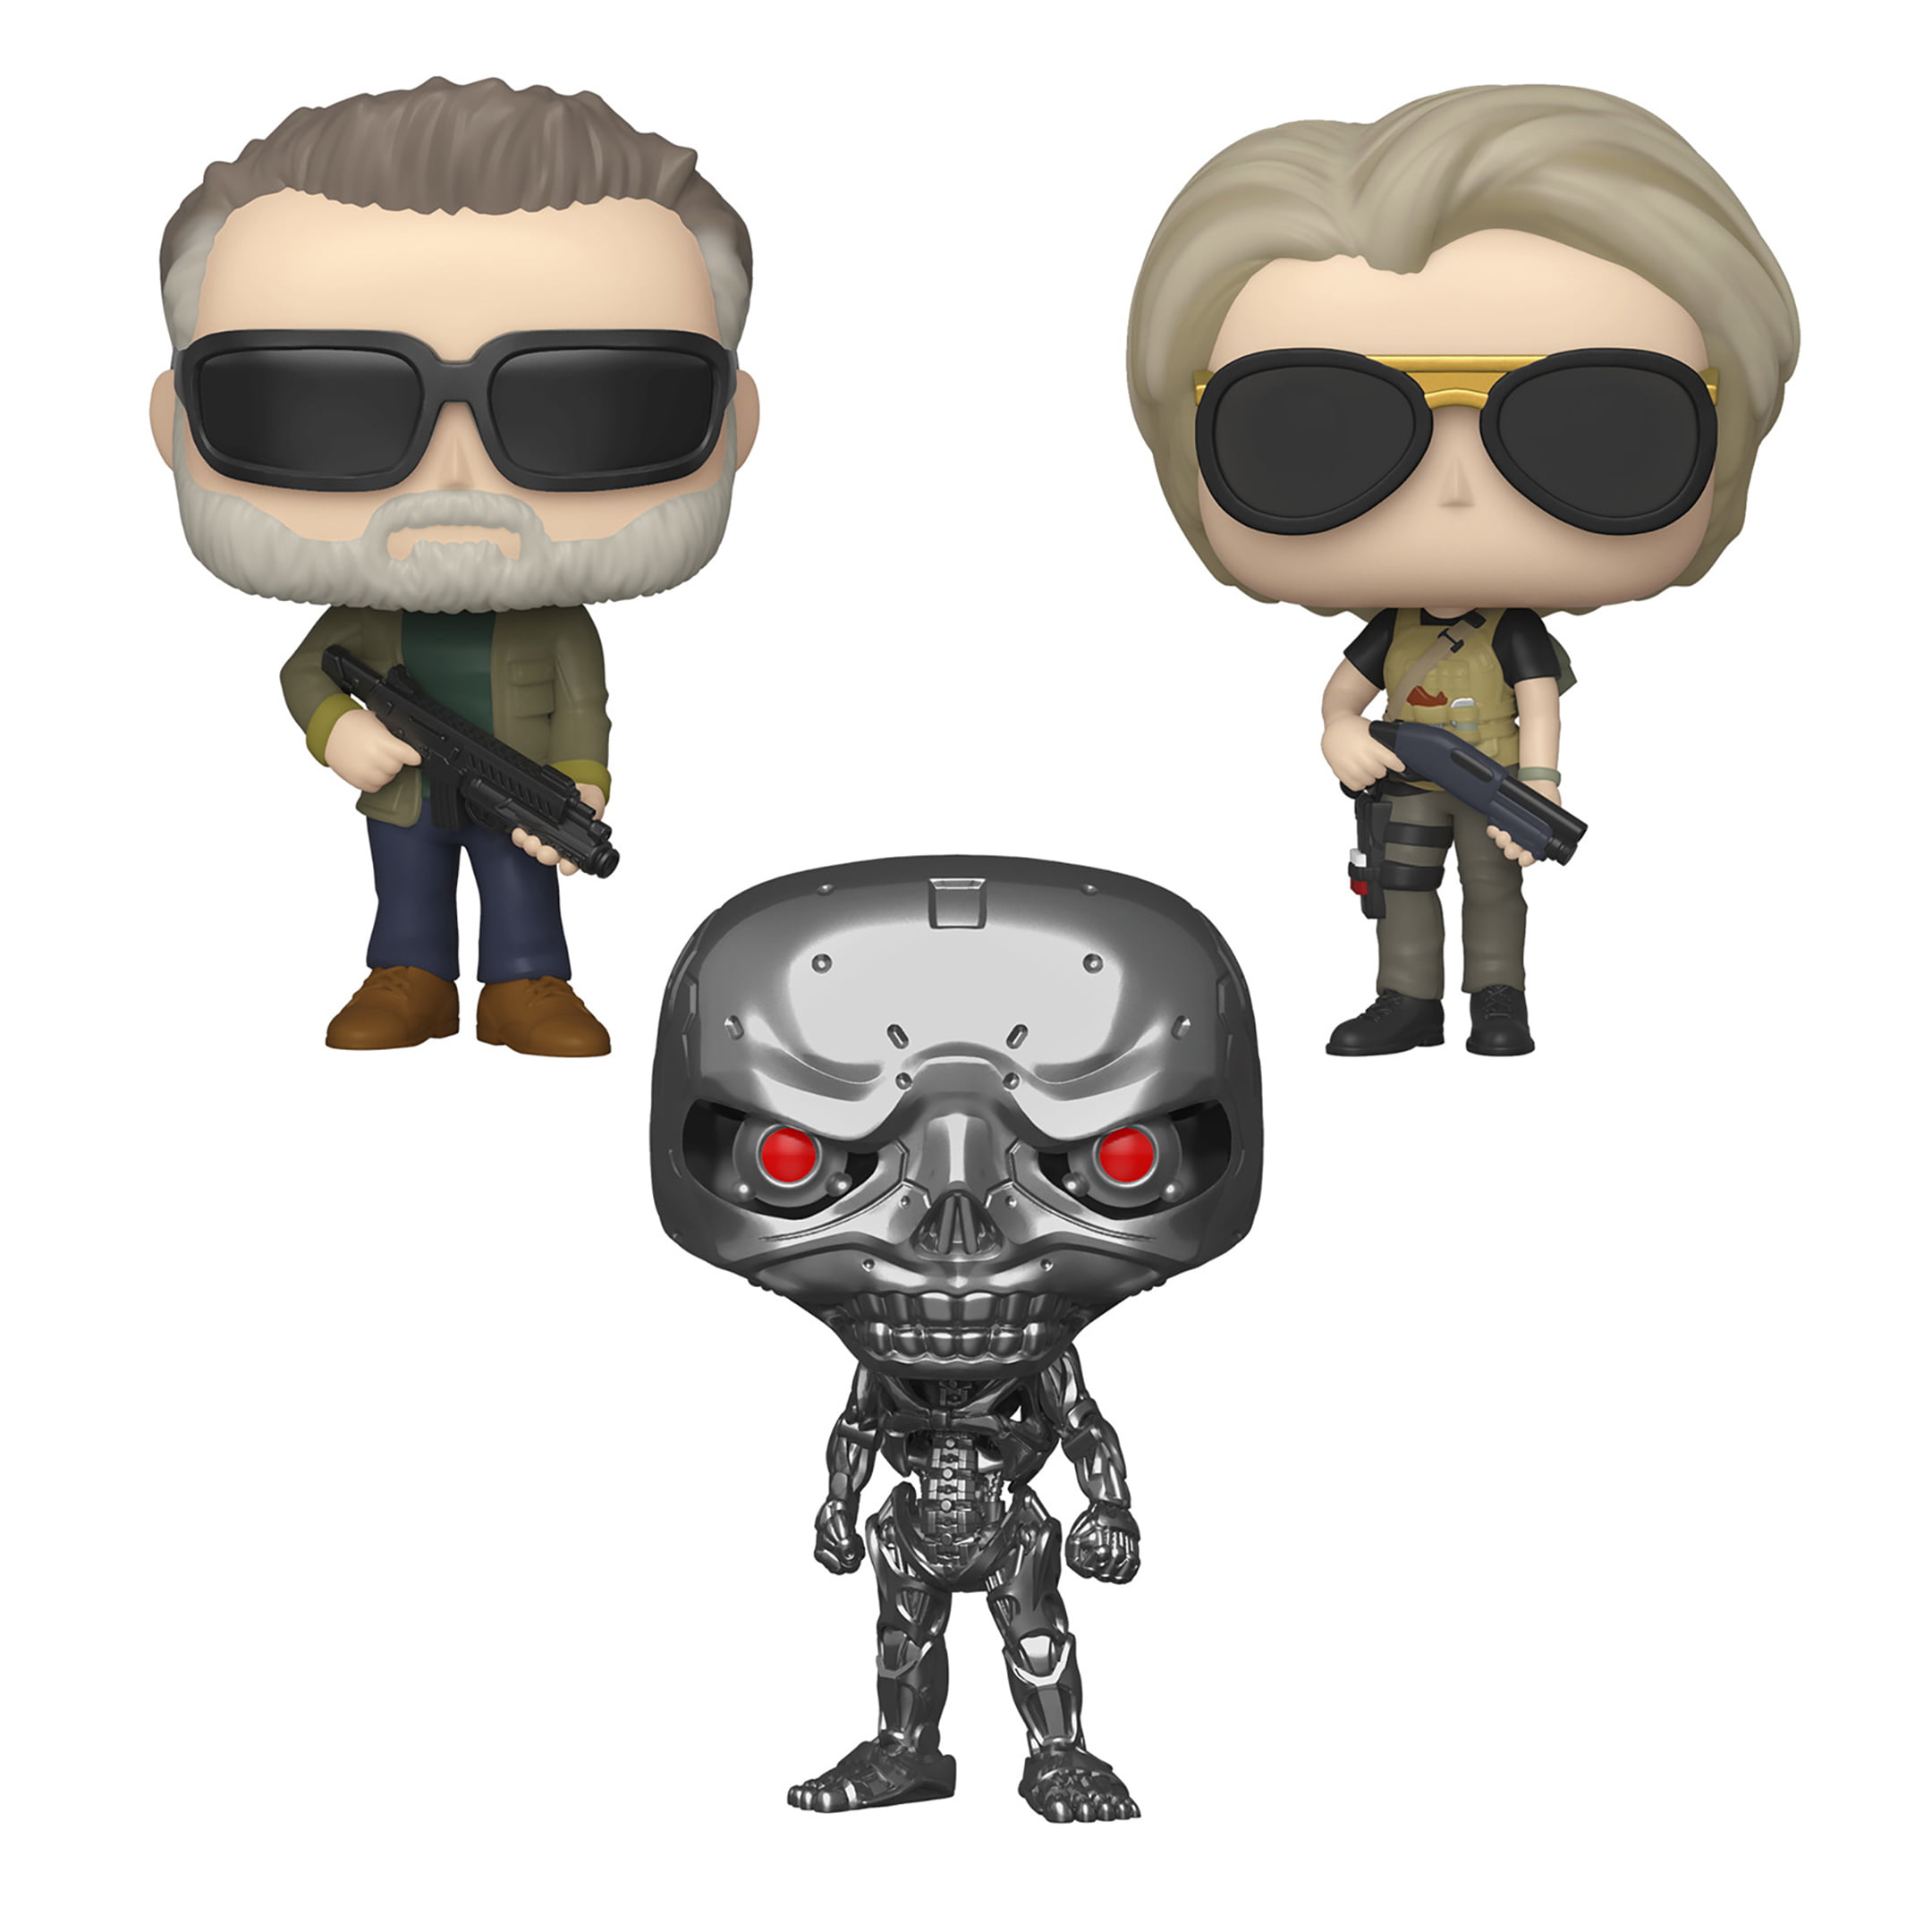 Funko POP! Movies Terminator Dark Fate Collectors Set - T-800, Sarah Connor  (Possible Limited Chase Edition), REV-9